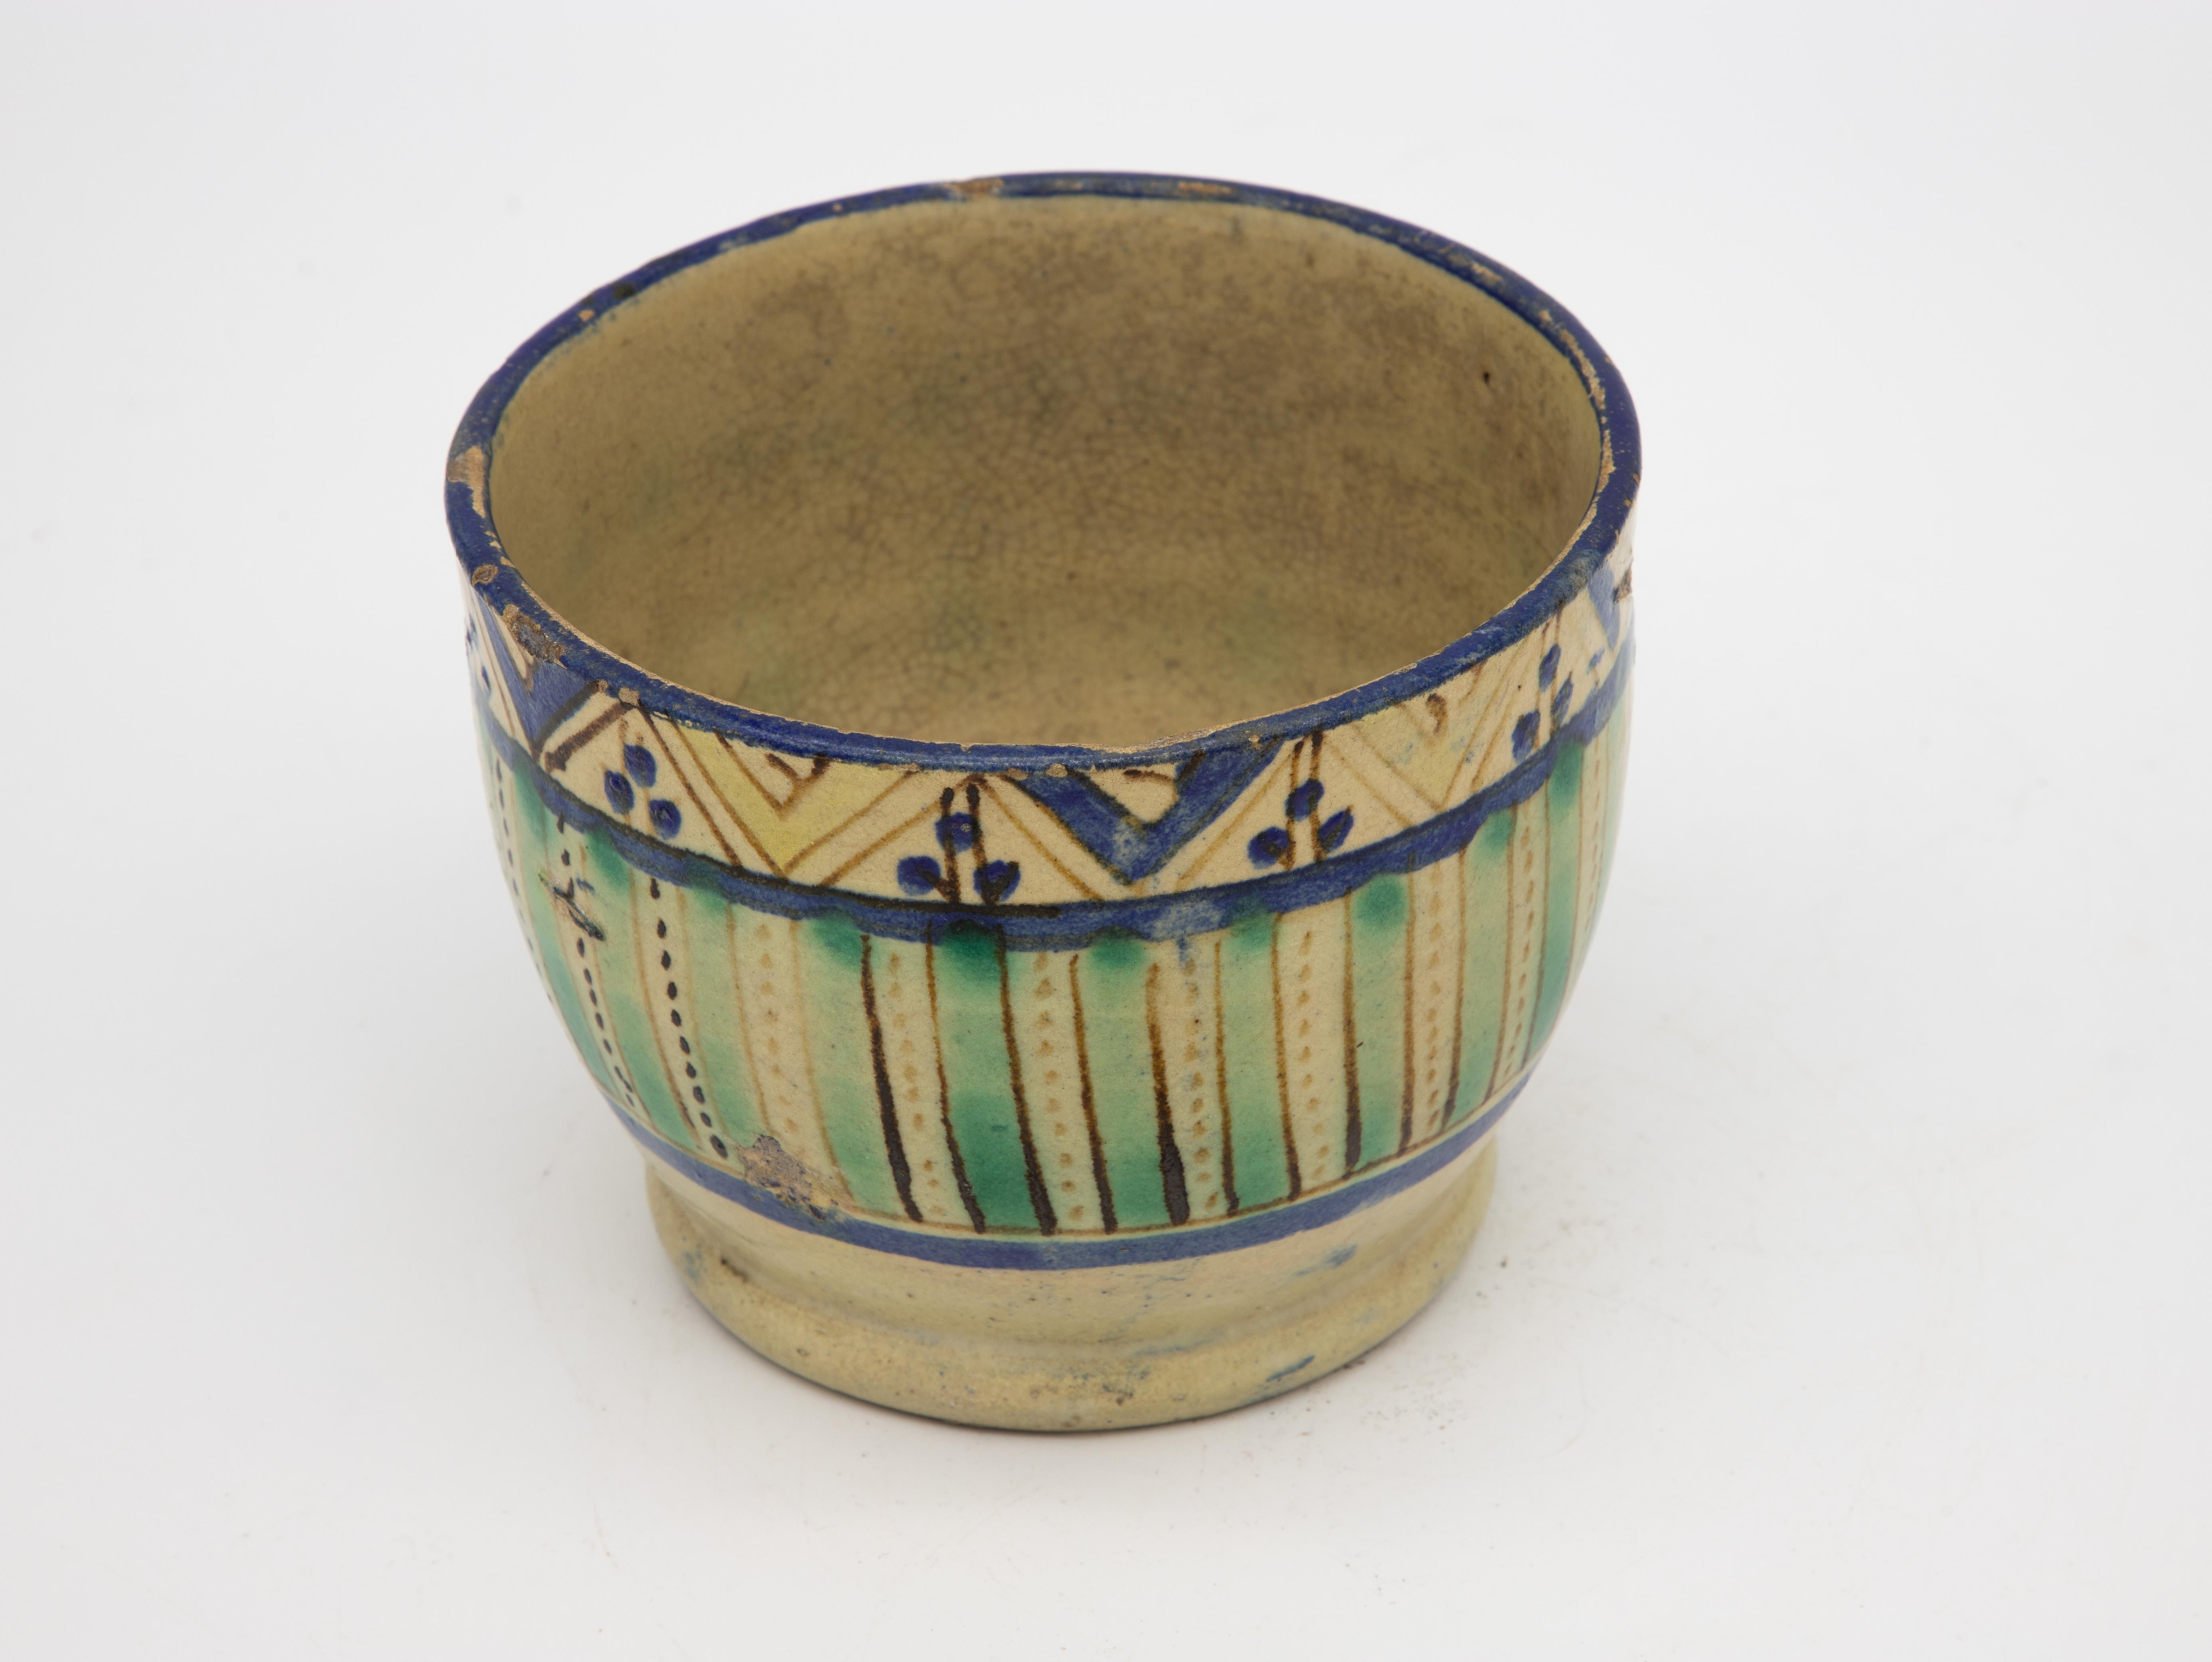 A beautiful handpainted Fes ceramic bowl or bowl brightly colored in aqua, blue, and saffron. Featuring a repeating pattern of stripes, lines, and dots. This Moroccan bowl was made in Fes at the end of 19th century. Wear consistent with age and use.